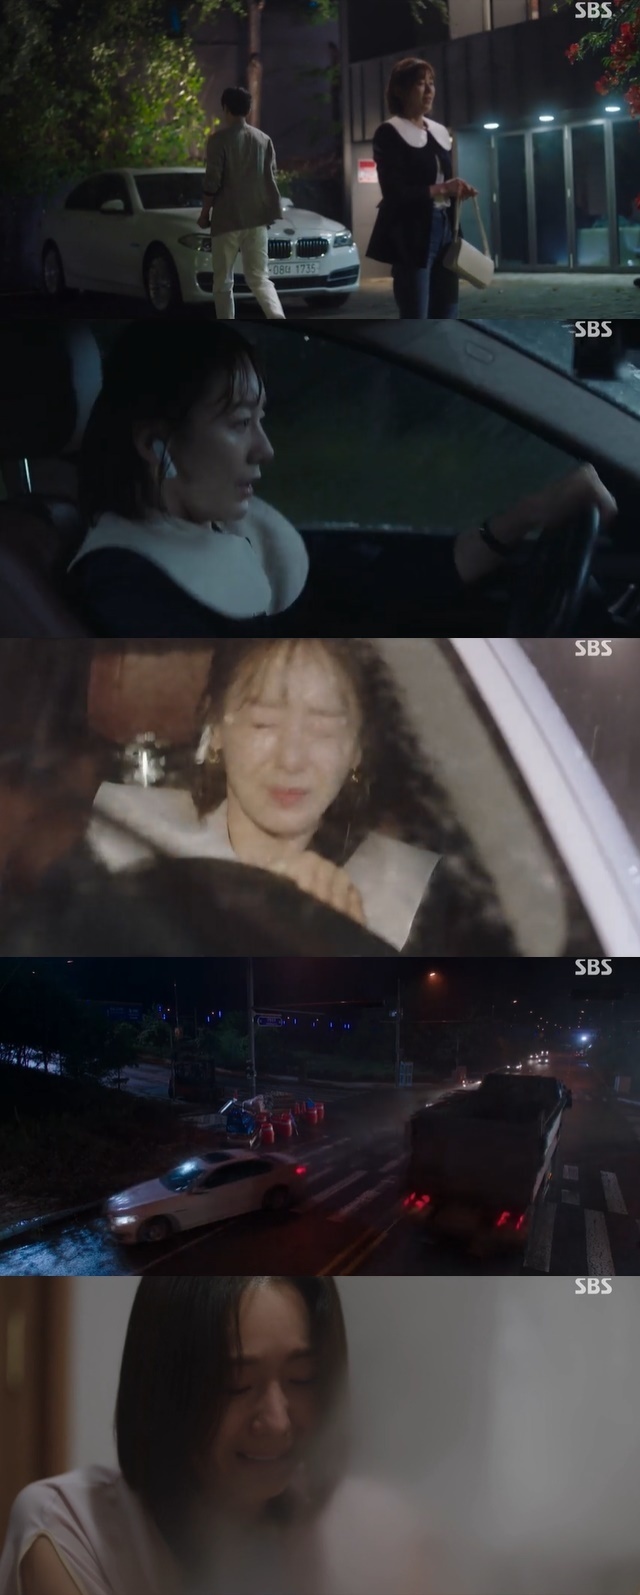 It was his fiancee Yoon Jeong-hee who triggered Shin Dong-wooks traffic accident 10 years ago.In the 11th episode of SBSs gilt Drama Now, Im Breaking Up (playplayplayed by Jane, directed by Lee Gil-bok), which was broadcast on December 17, the secret of Yoon Soo-wan (played by Shin Dong-wook)s traffic accident was revealed 10 years ago.On this day, Shin Yoo-jung (Yoon Jeong-hee) met Yoon Jae-guk and asked, Do you really want to go to the end? Even if you lose everything?Yoon Jae-guk said, I honestly do not understand why my parents need consent in my love and my marriage. I just want to find my life mate, so I found it.Shin Yu-jung described it as a tragedy that Ha Young-eun (Song Hye-kyo) is a tragedy. Then Yoon Jae-guk said, How do you know that your sister does not know?Thats why I followed my brother. In the rain. Yoon Jae-guk told Shin Yoo-jung, I was a little strange when I heard that my brother was drunk driving by the police.So I found the shop where I drank, I heard that my brother was with someone, and I knew that it was my sister. In the past, Yoon Jae-guk heard testimony from the bartender that the woman seemed to drive and follow.At the time of the actual incident 10 years ago, Shin Yoo-jung chased Yoon Soo-wan, who was going to meet Ha Young-eun.Shin Yoo-jung tried to stop Yoon Su-wans car with his car over the central line, and Yoon Su-wan could not avoid the truck opposite and died in a traffic accident.Shin Yu-jung said, I realized that Su-wan had drunk alcohol after the car started, and I was afraid of the rain and I thought I had to stop somehow.